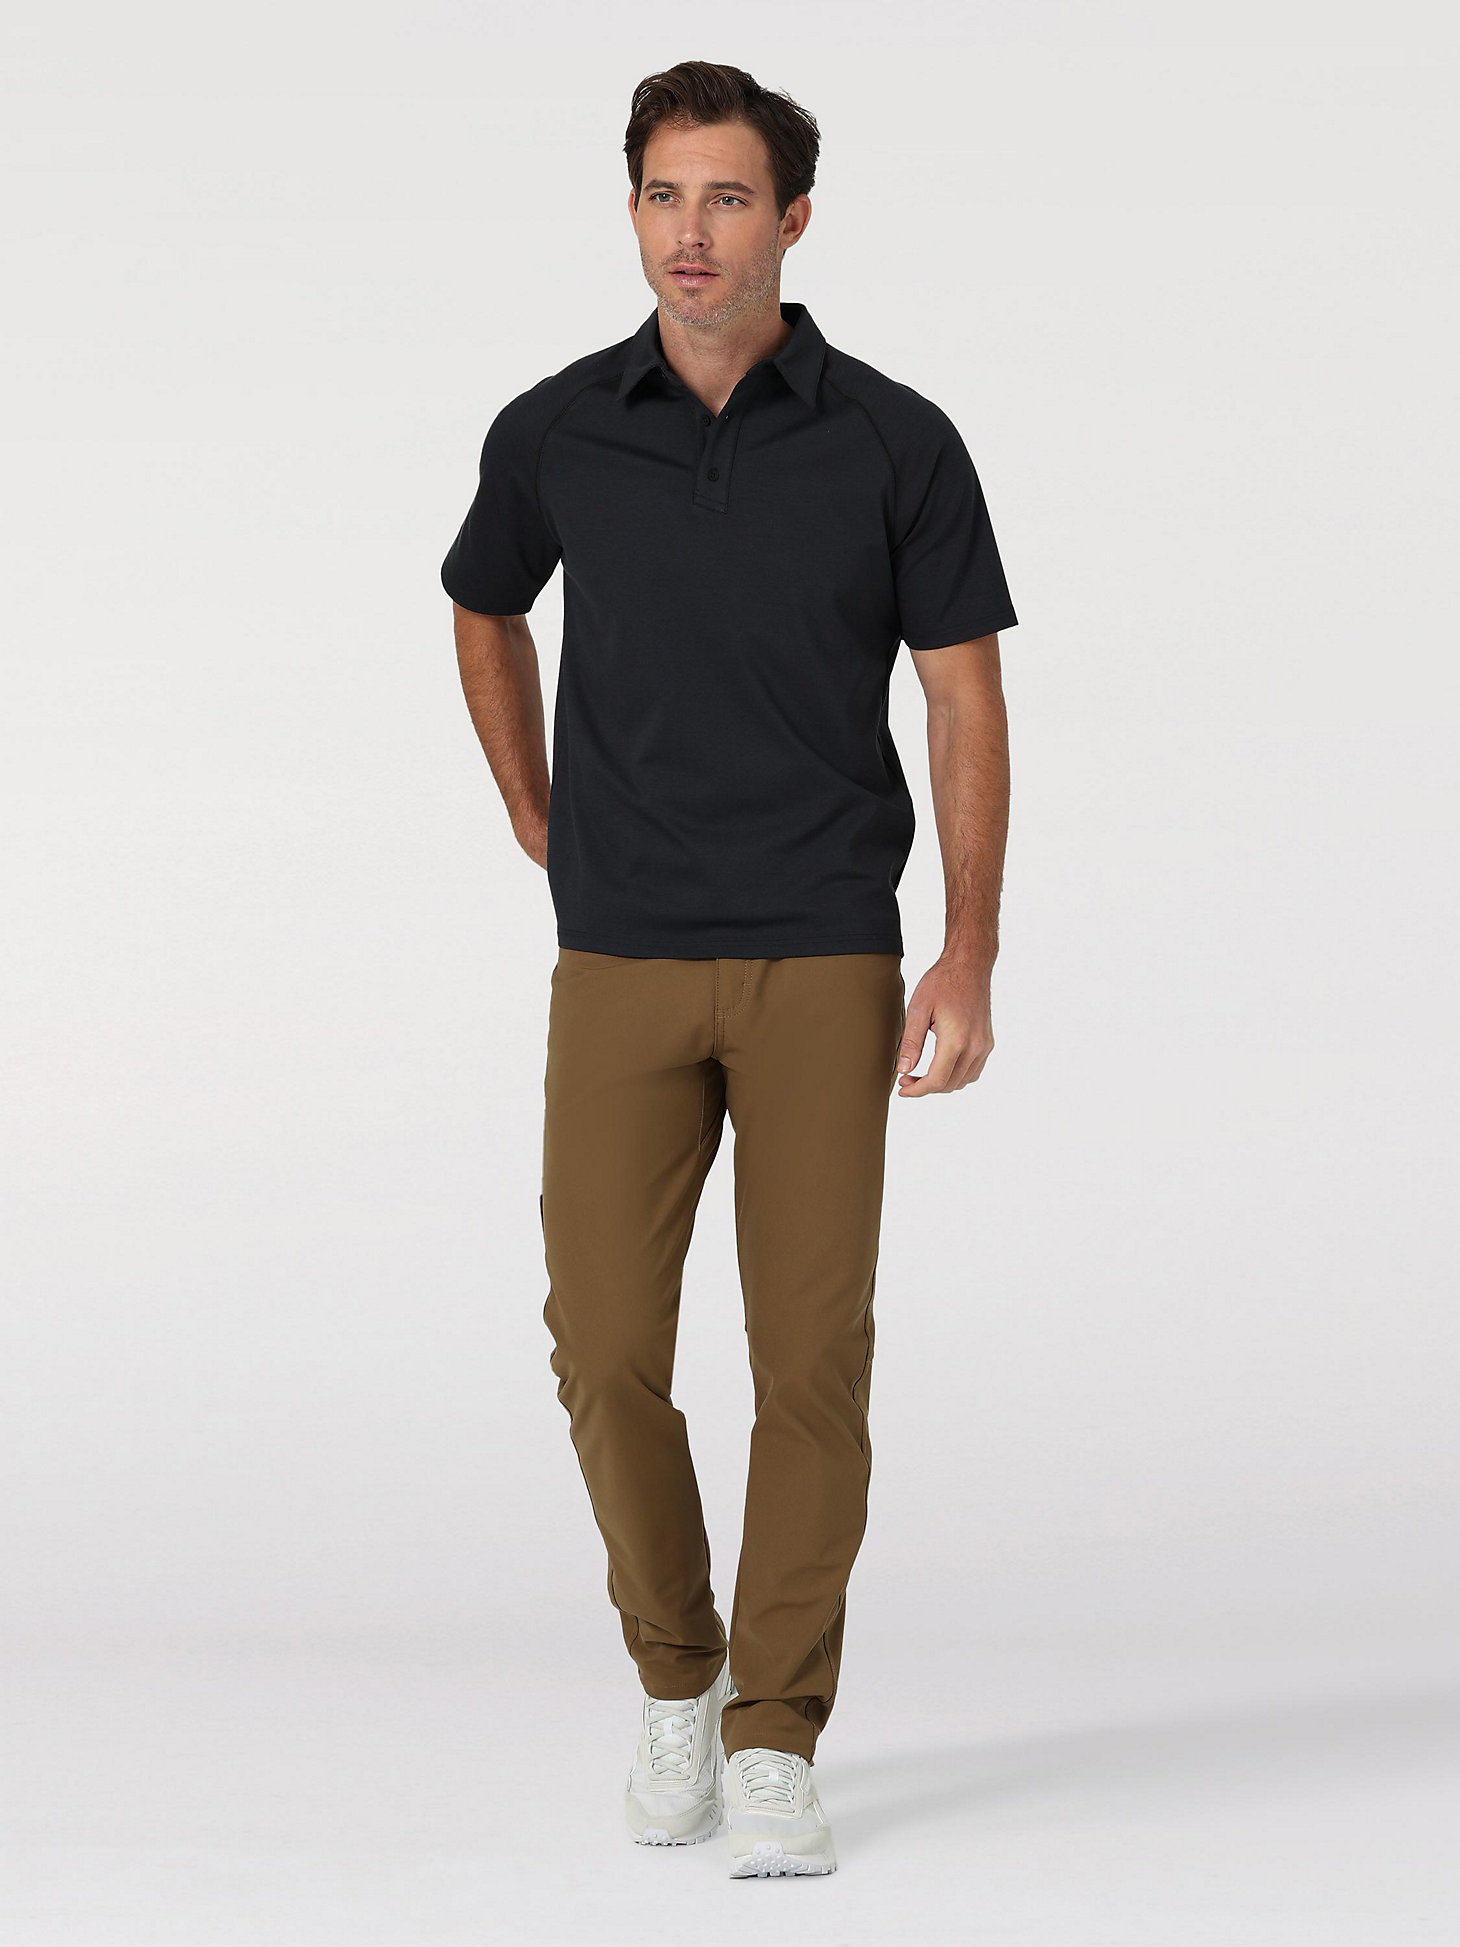 Short Sleeve Performance Polo in Black alternative view 1